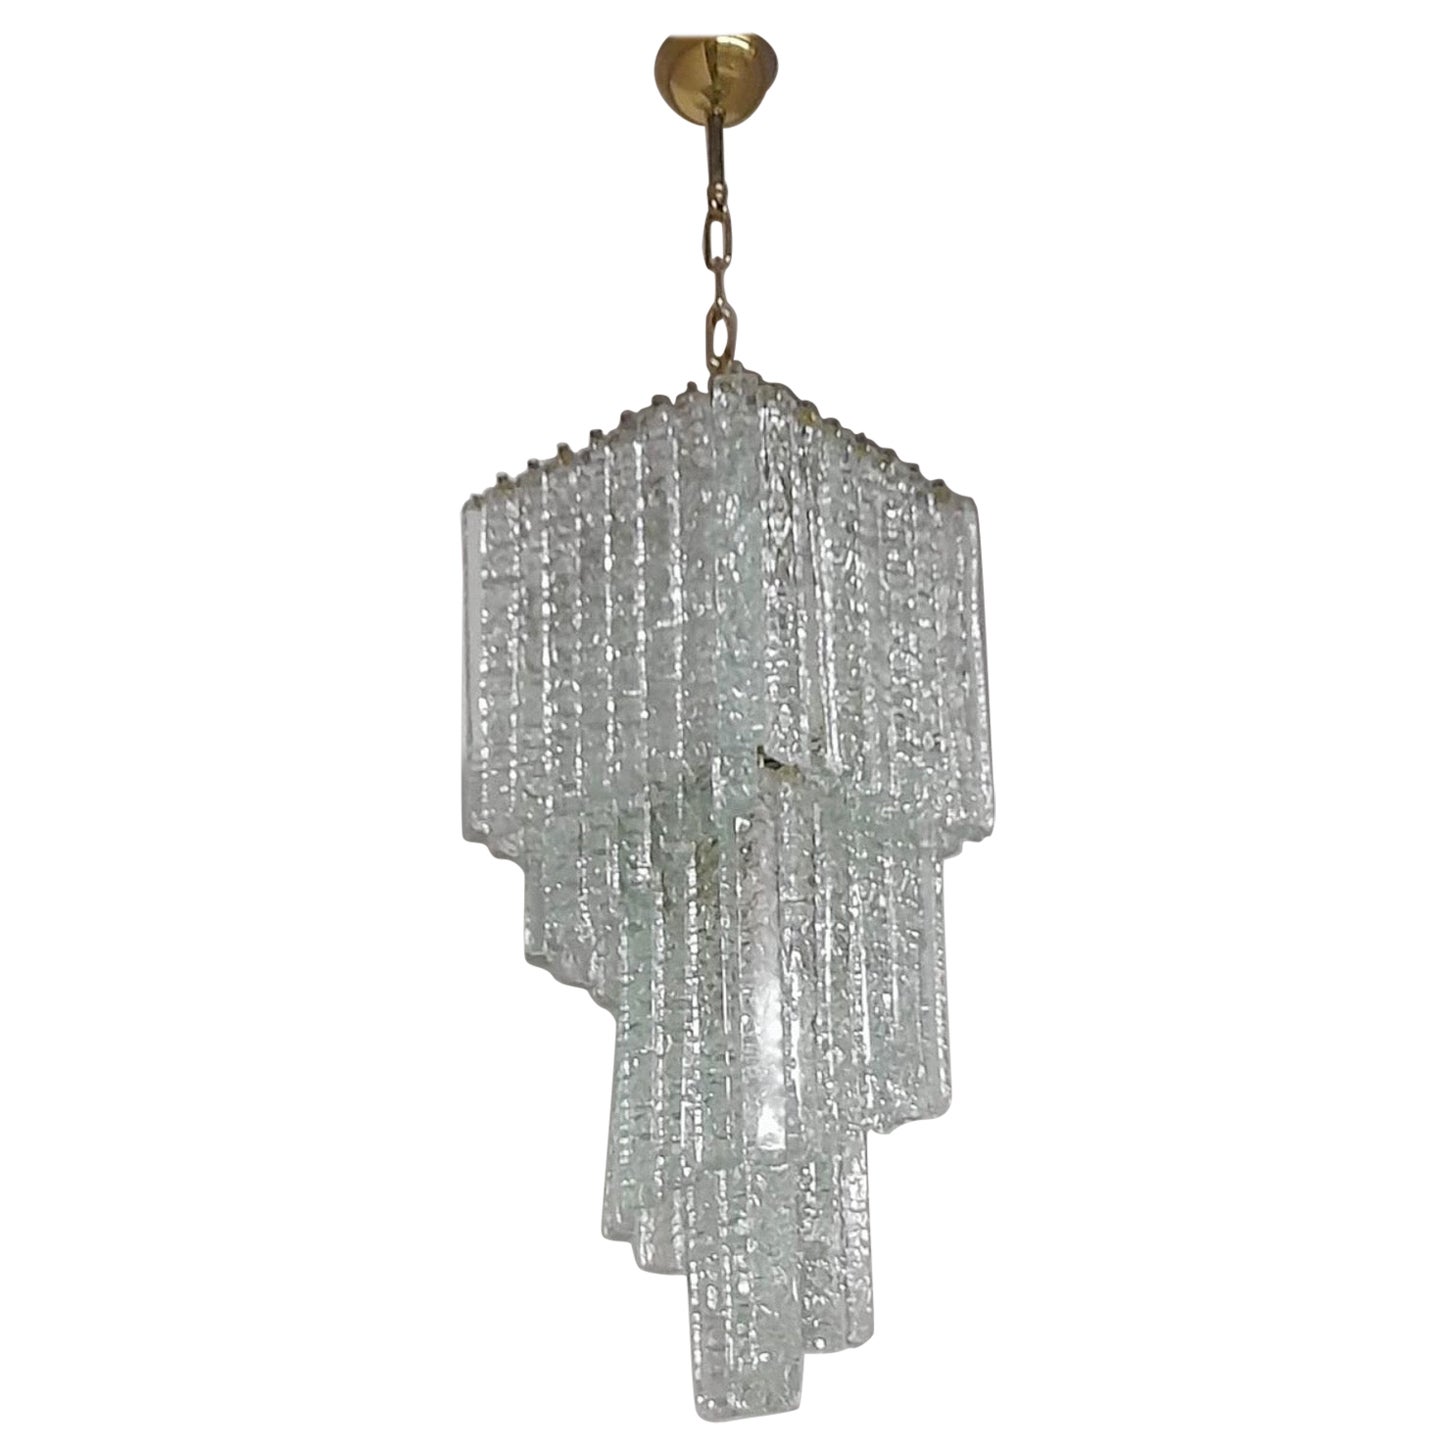 1970s Mid-Century Modern Ice effect Murano Glass Cascading Chandelier by Mazzega For Sale